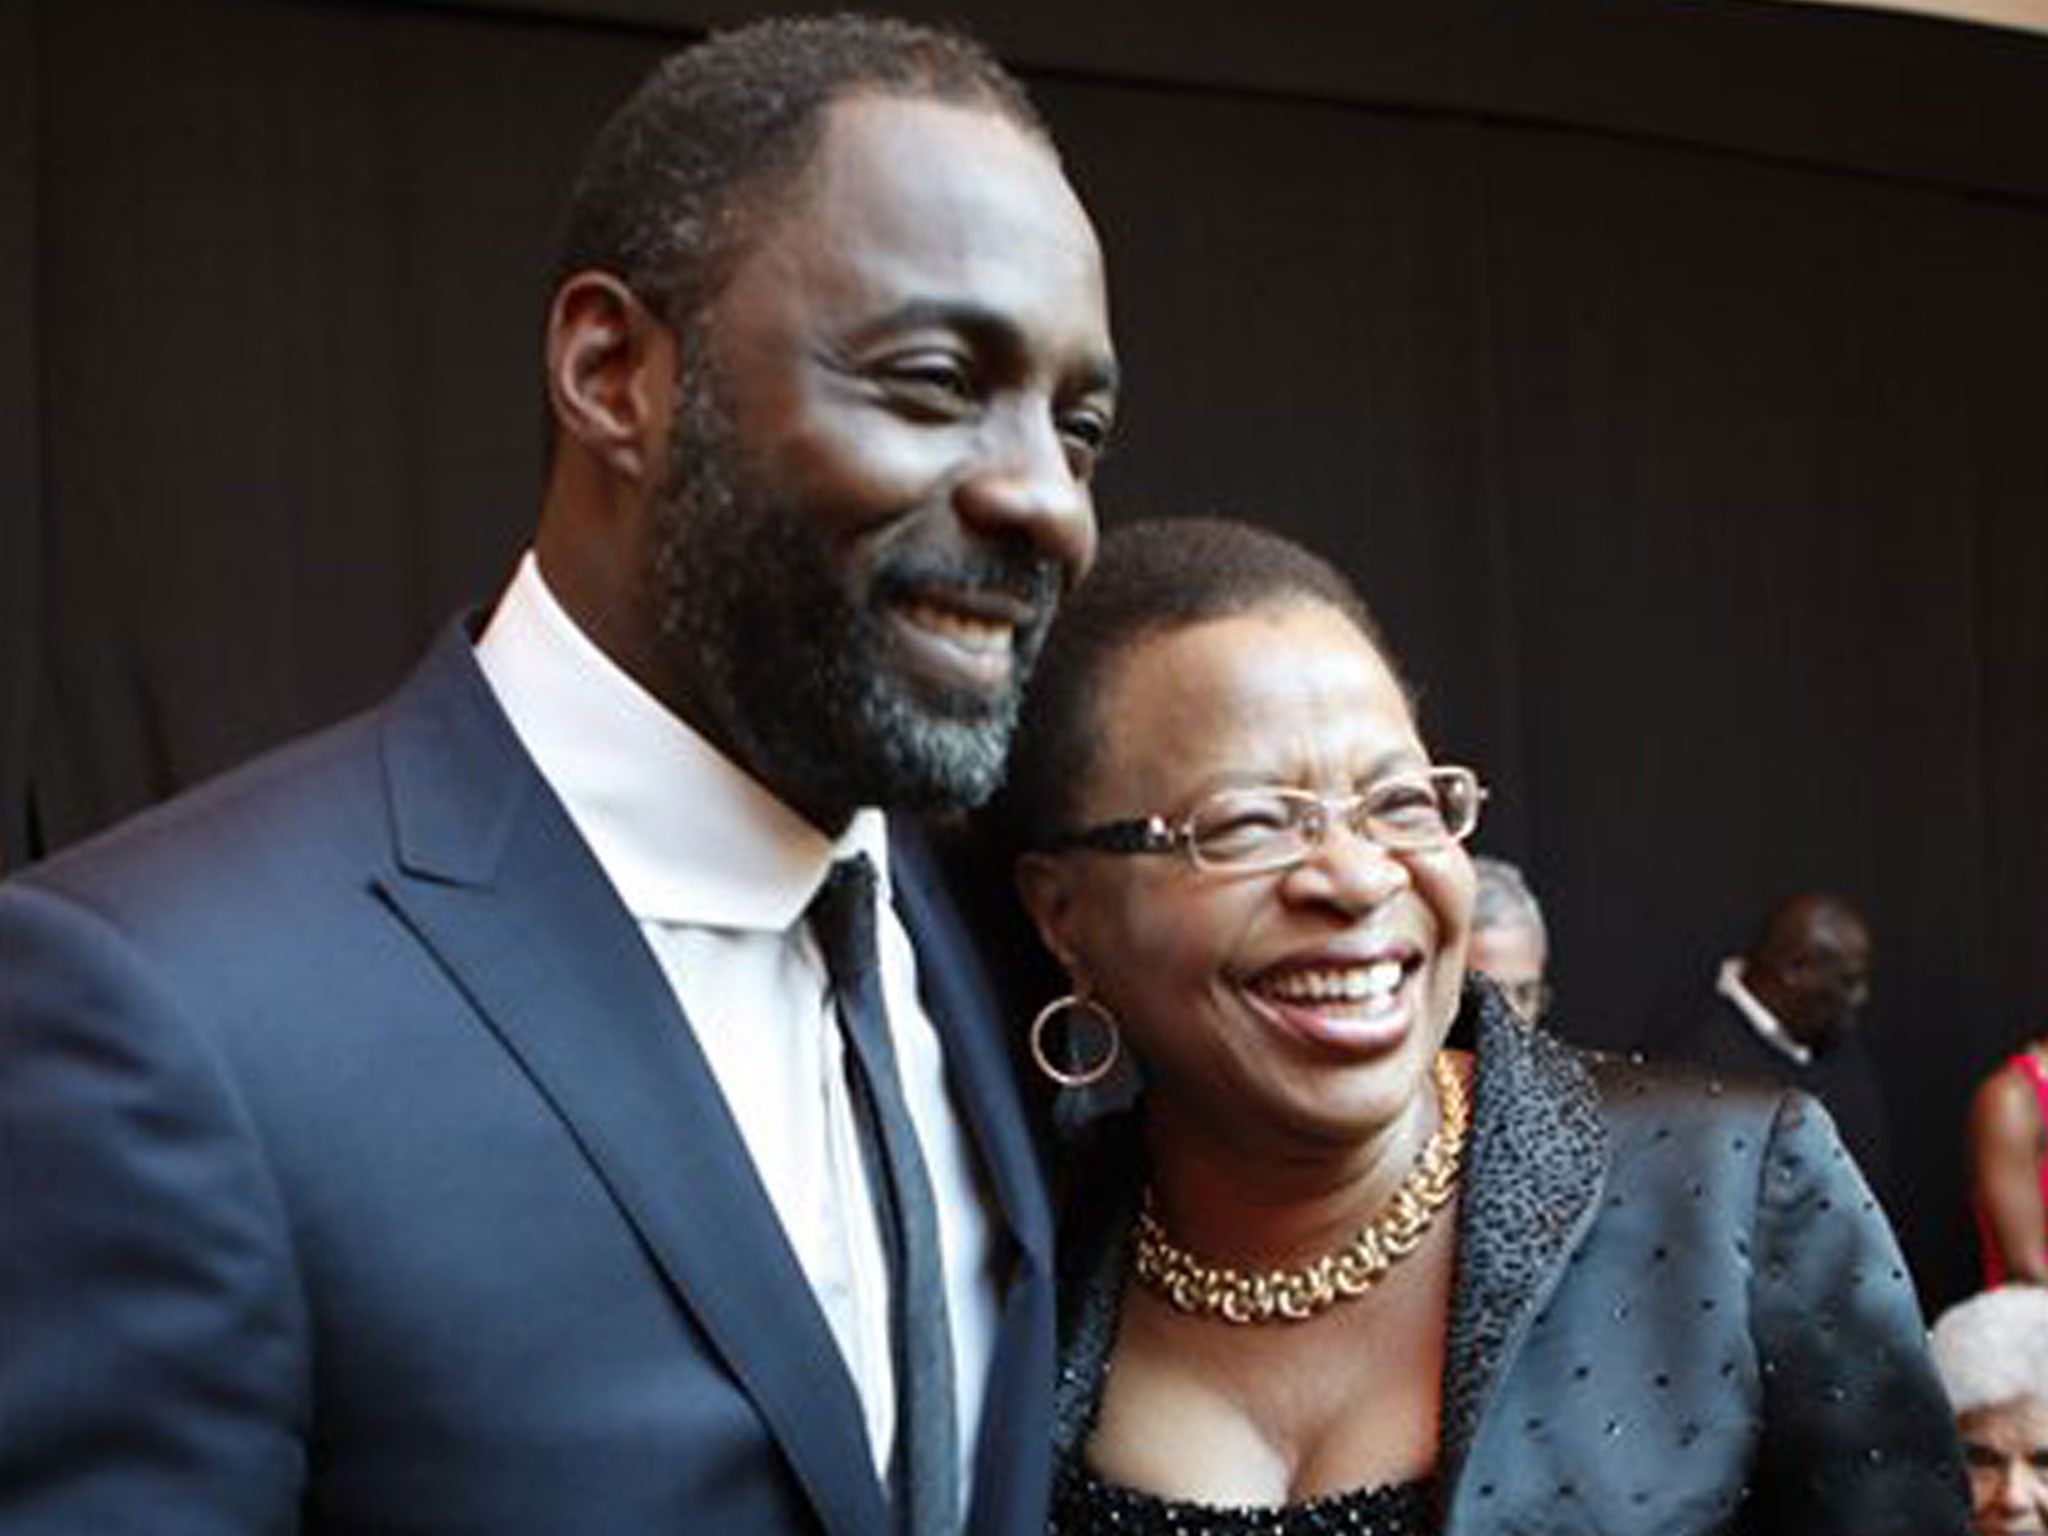 Idris Elba with Graca Machel, the wife of former South African President Nelson Mandela, at the premiere of Mandela: Long Walk to Freedom in Johannesburg